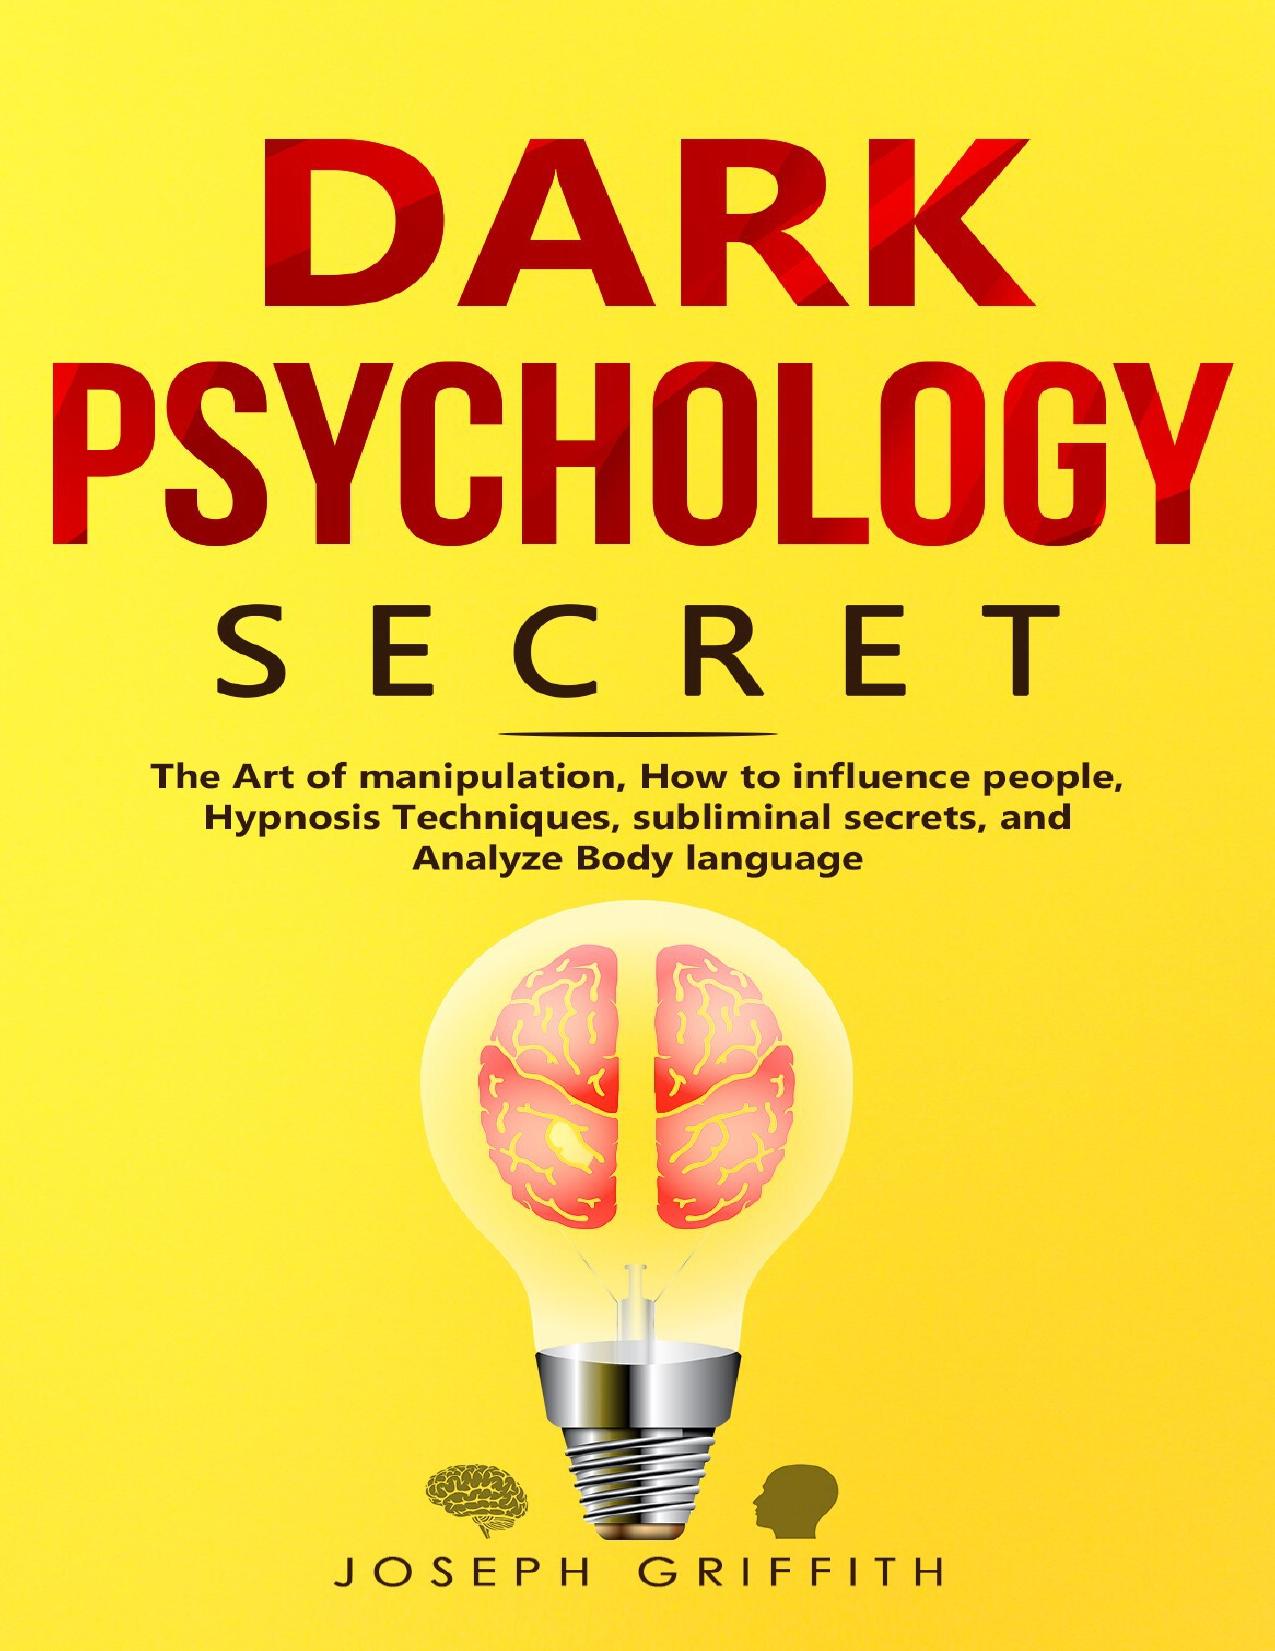 Dark Psychology Secret: The Ultimate Guide to Learning the Art of Persuasion and Manipulation, Mind Control Techniques & Brainwashing. Discover the Art of Reading People and Influence Human Behavior by Griffith Joseph